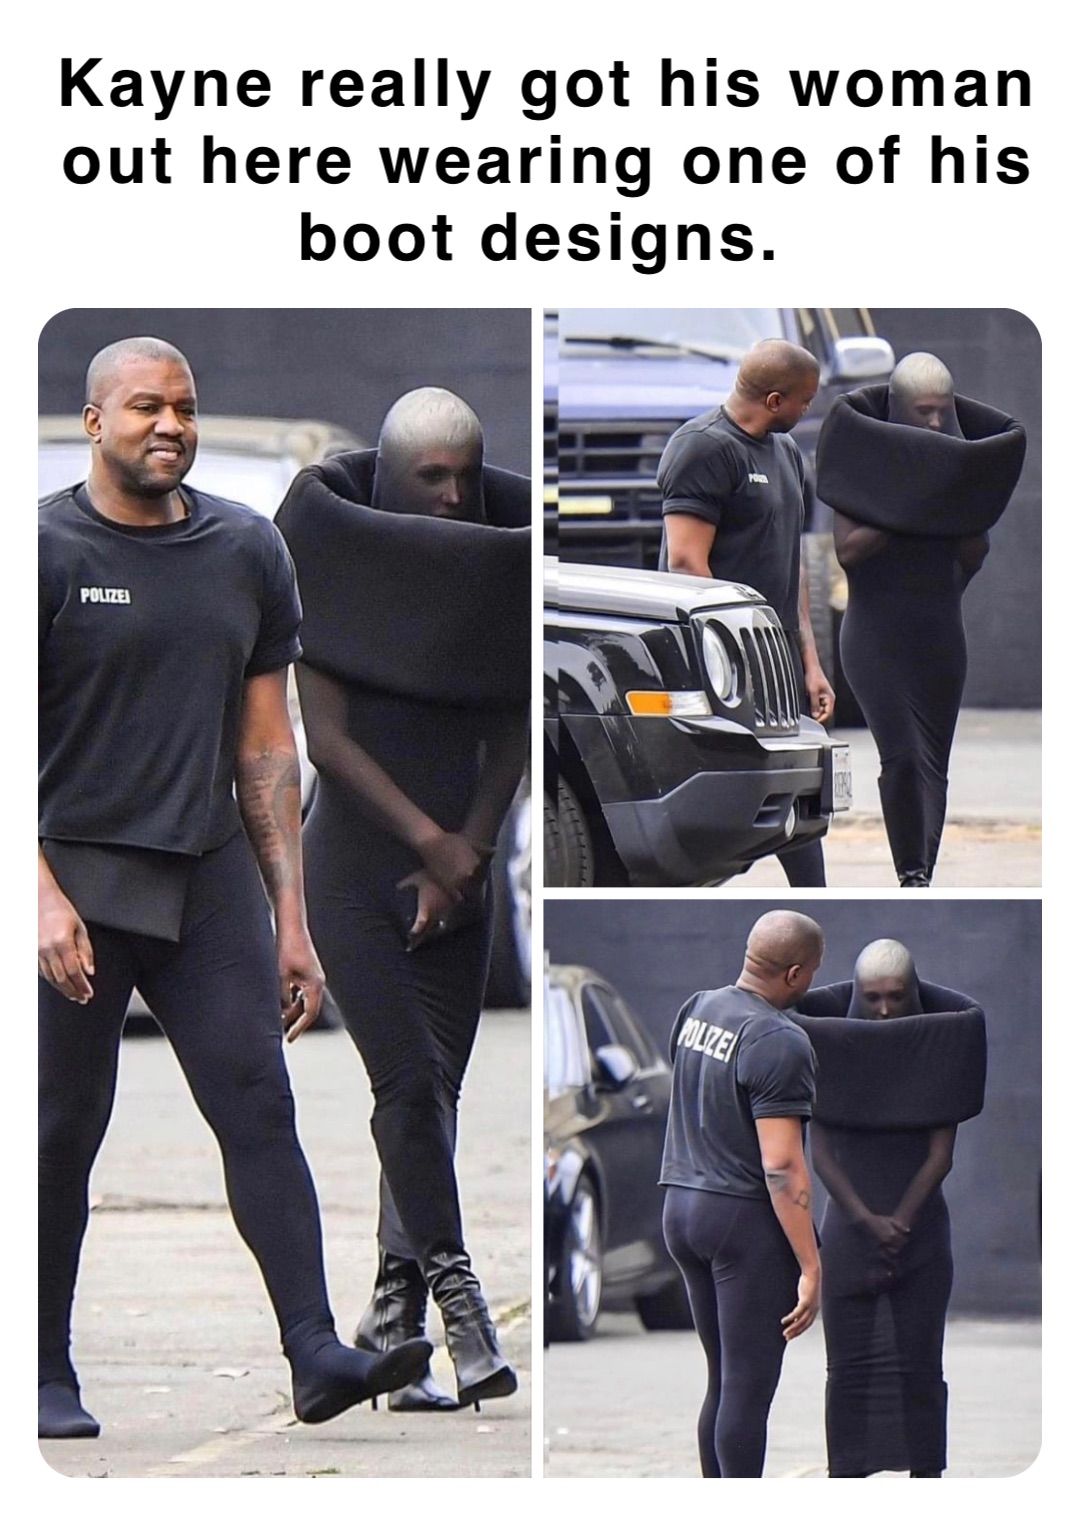 Kayne really got his woman out here wearing one of his boot designs.